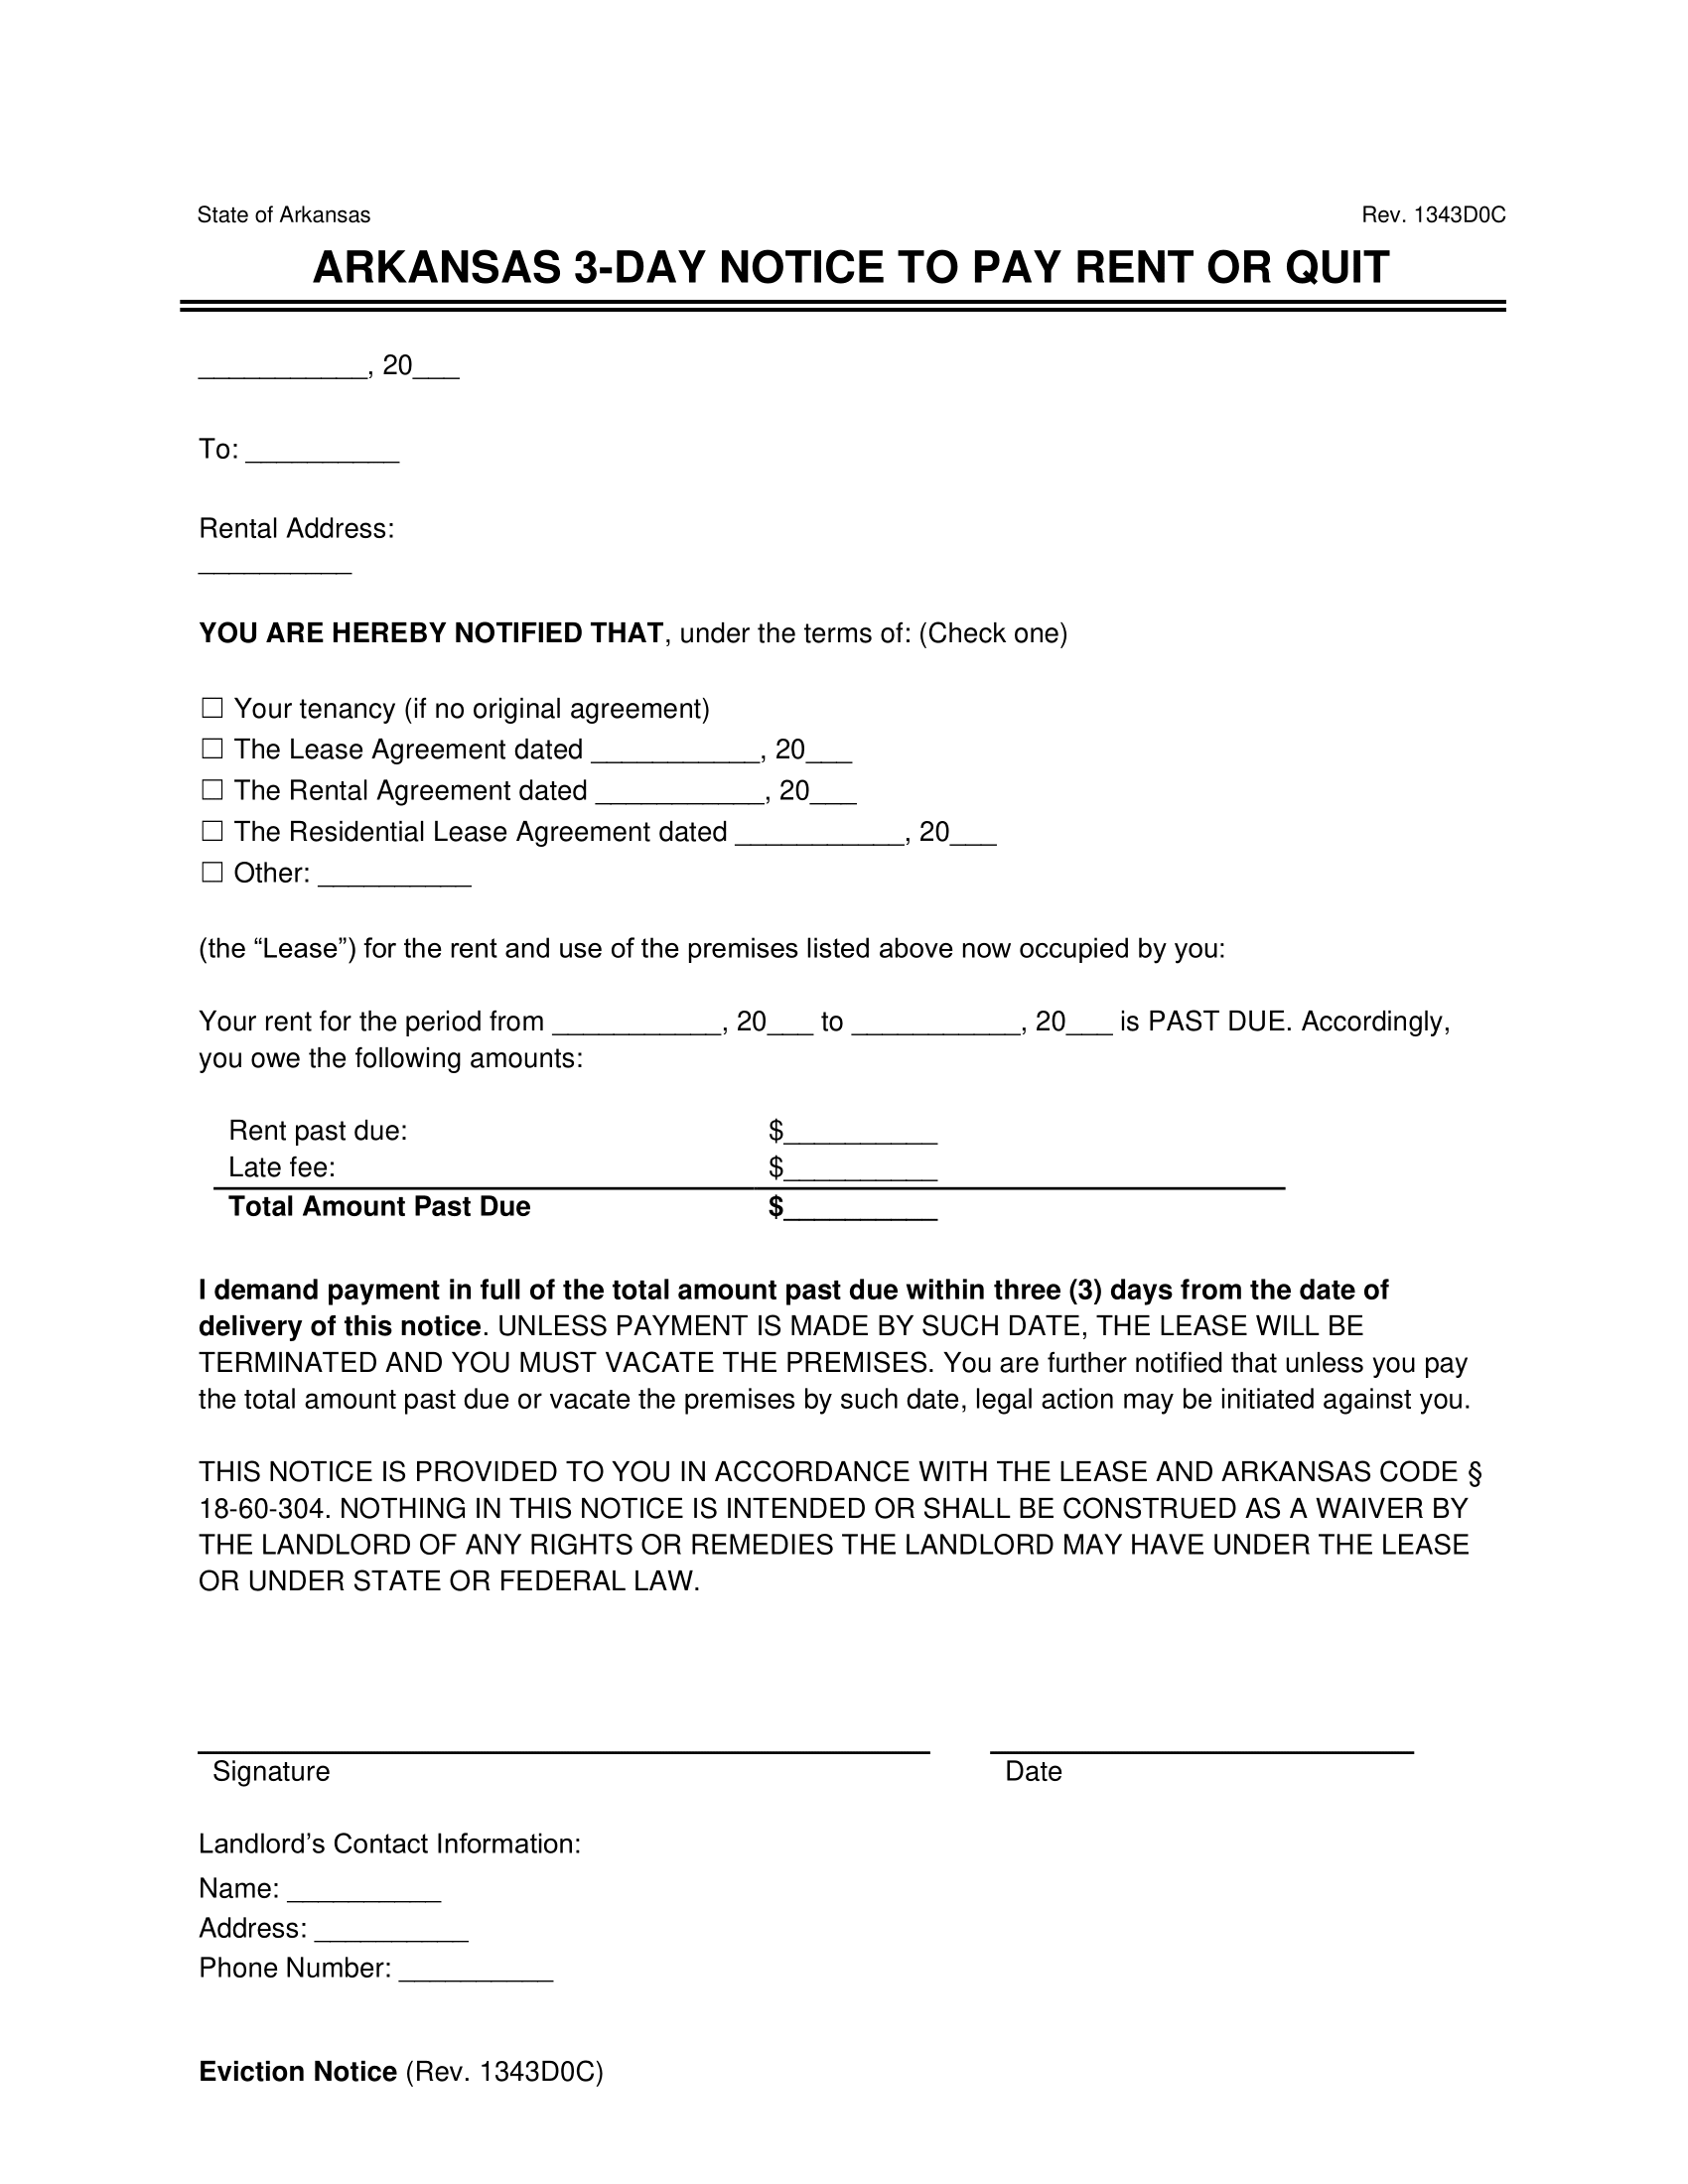 Arkansas 3-Day Notice to Quit for Non Payment of Rent